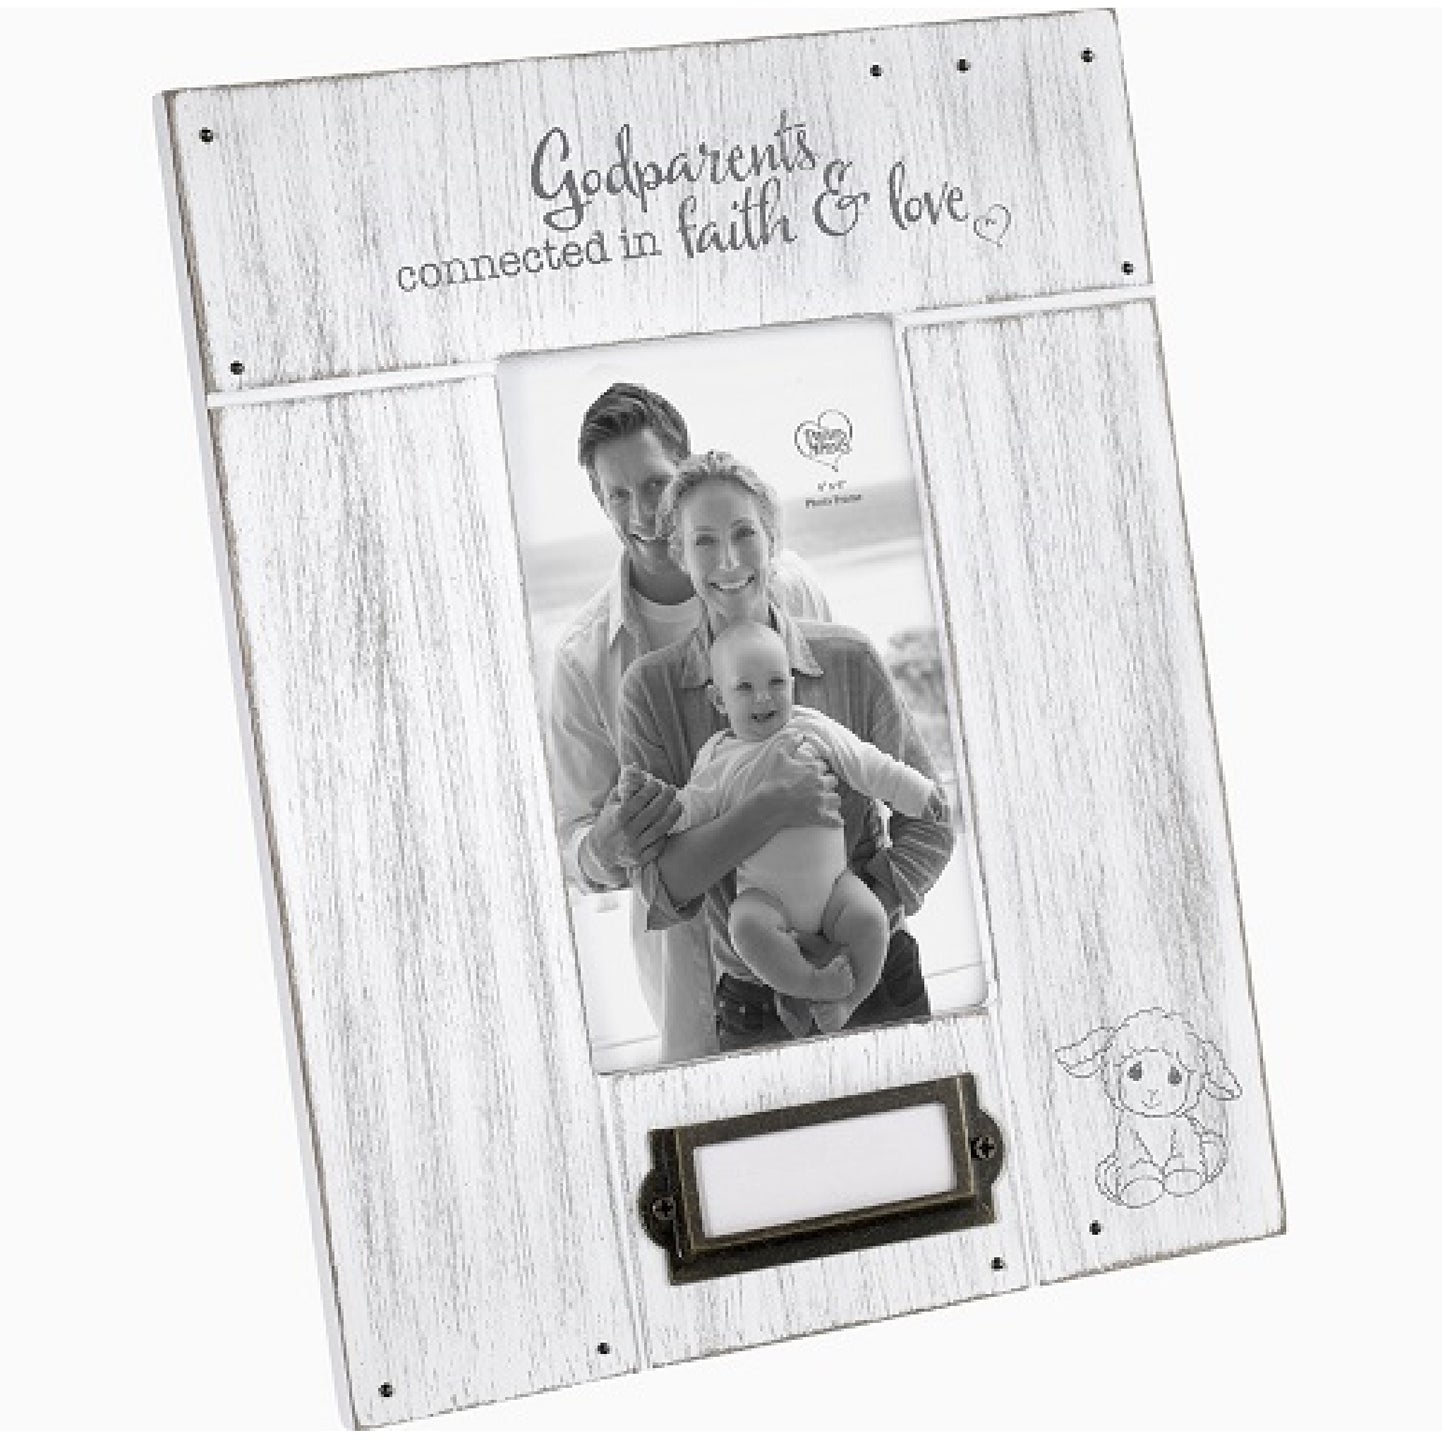 Godparents, Connected In Faith And Love Photo Frame